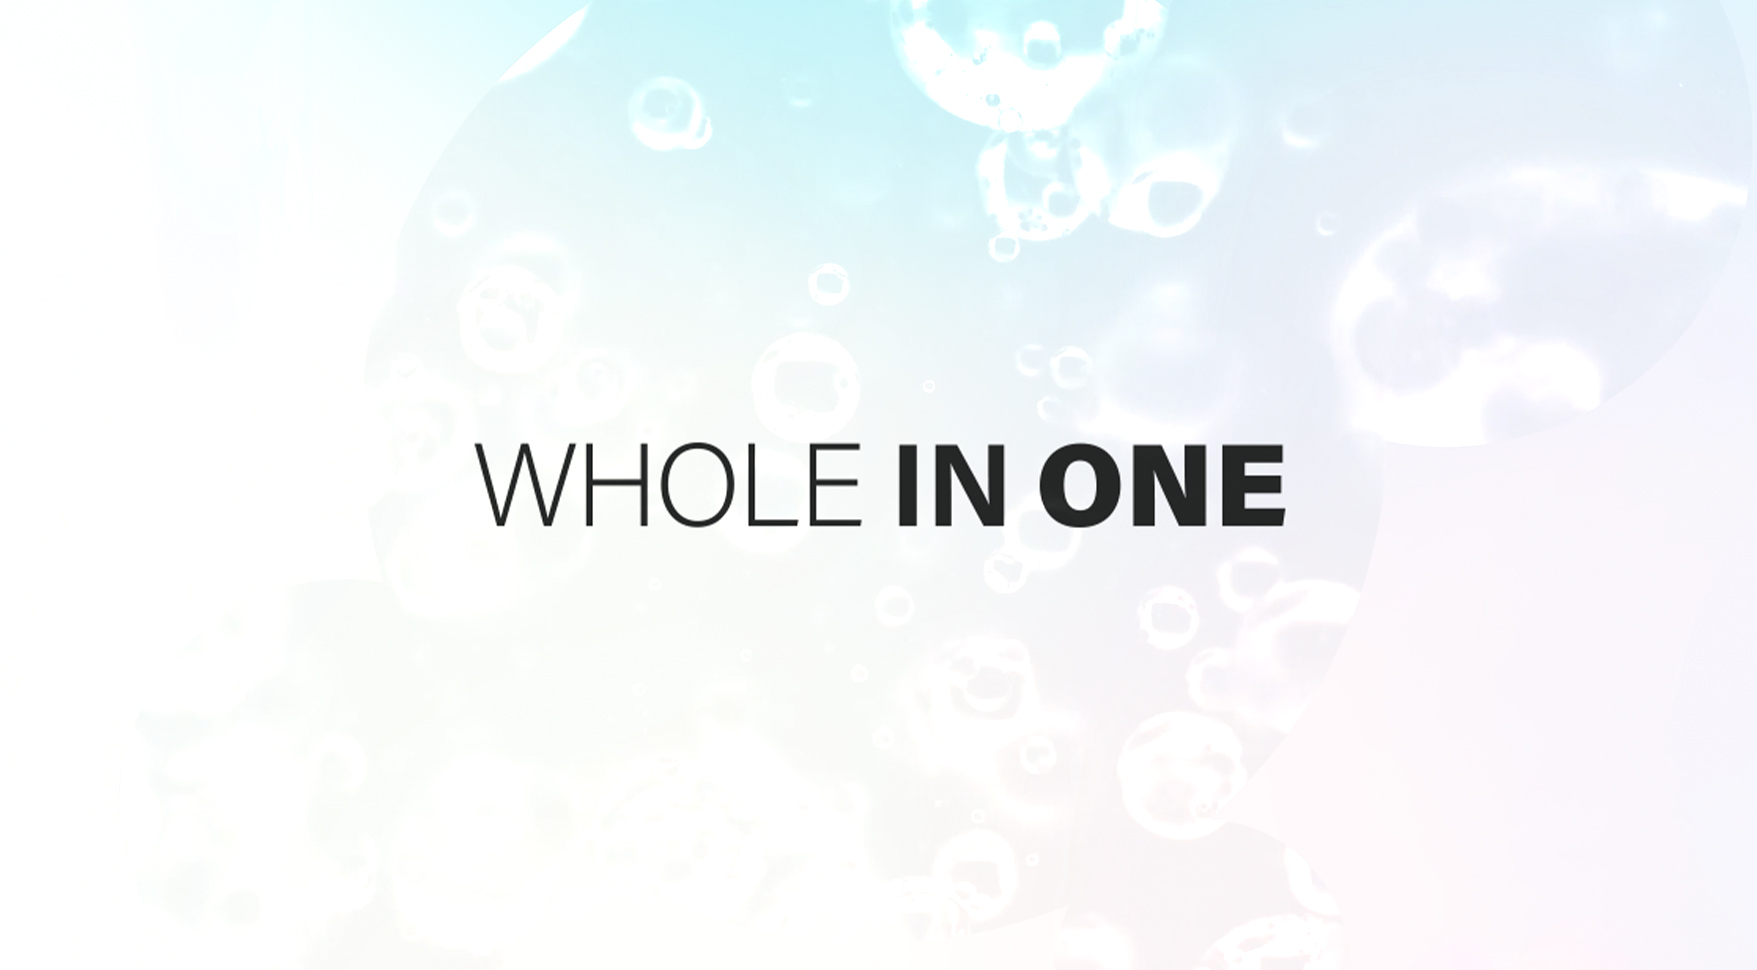 WHOLE IN ONE（株式会社ノバ）